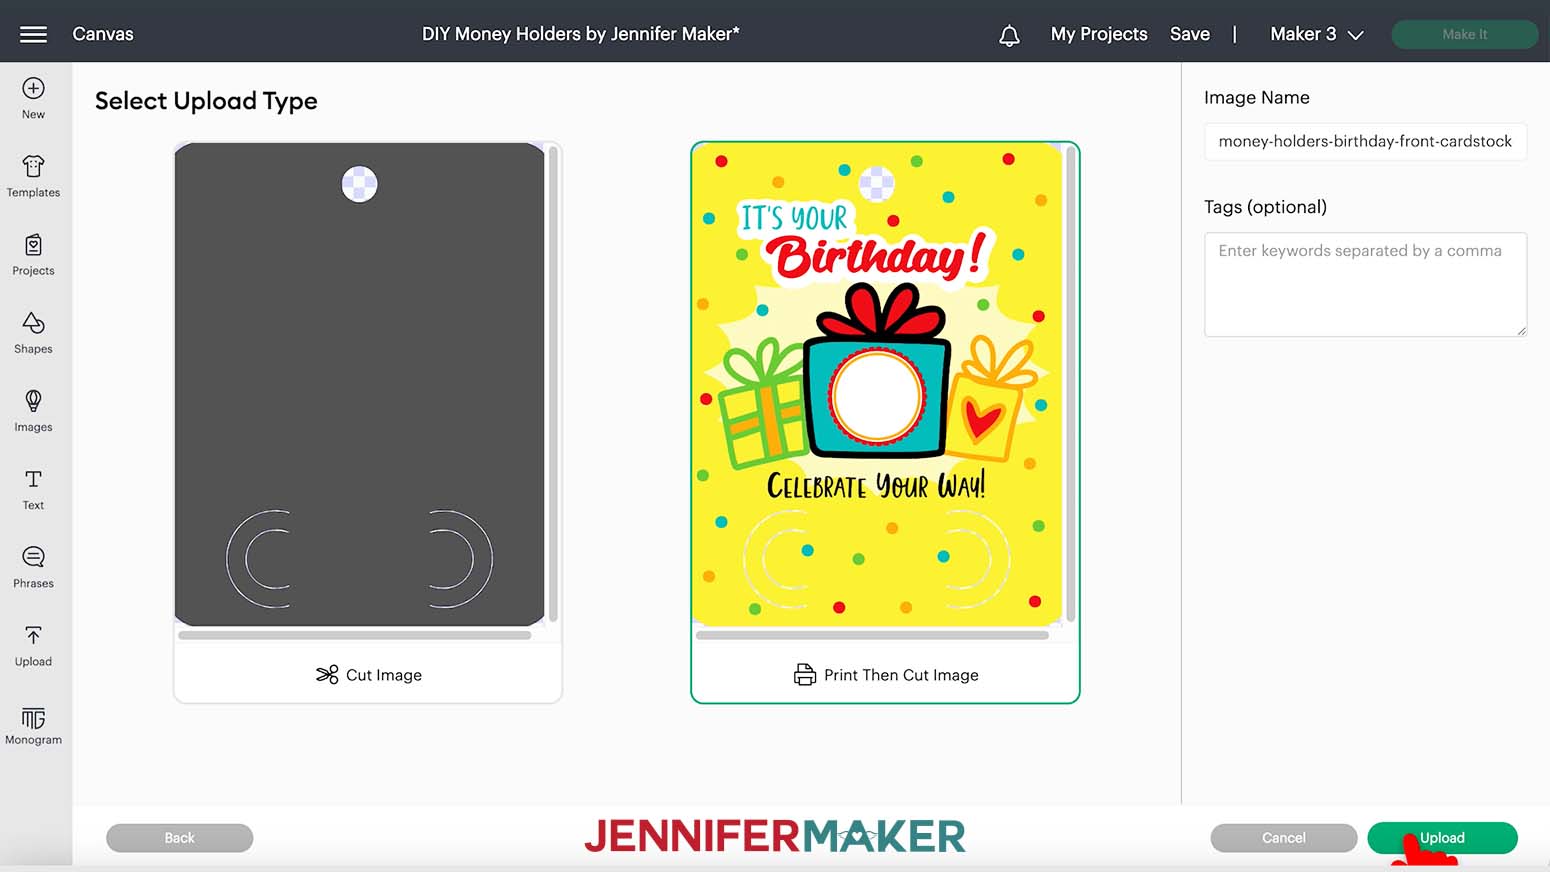 The Select Upload Type screen in Cricut Design Space showing the birthday DIY money holders design. Print Then Cut Image is selected and the pointer is hovering over the Upload button.